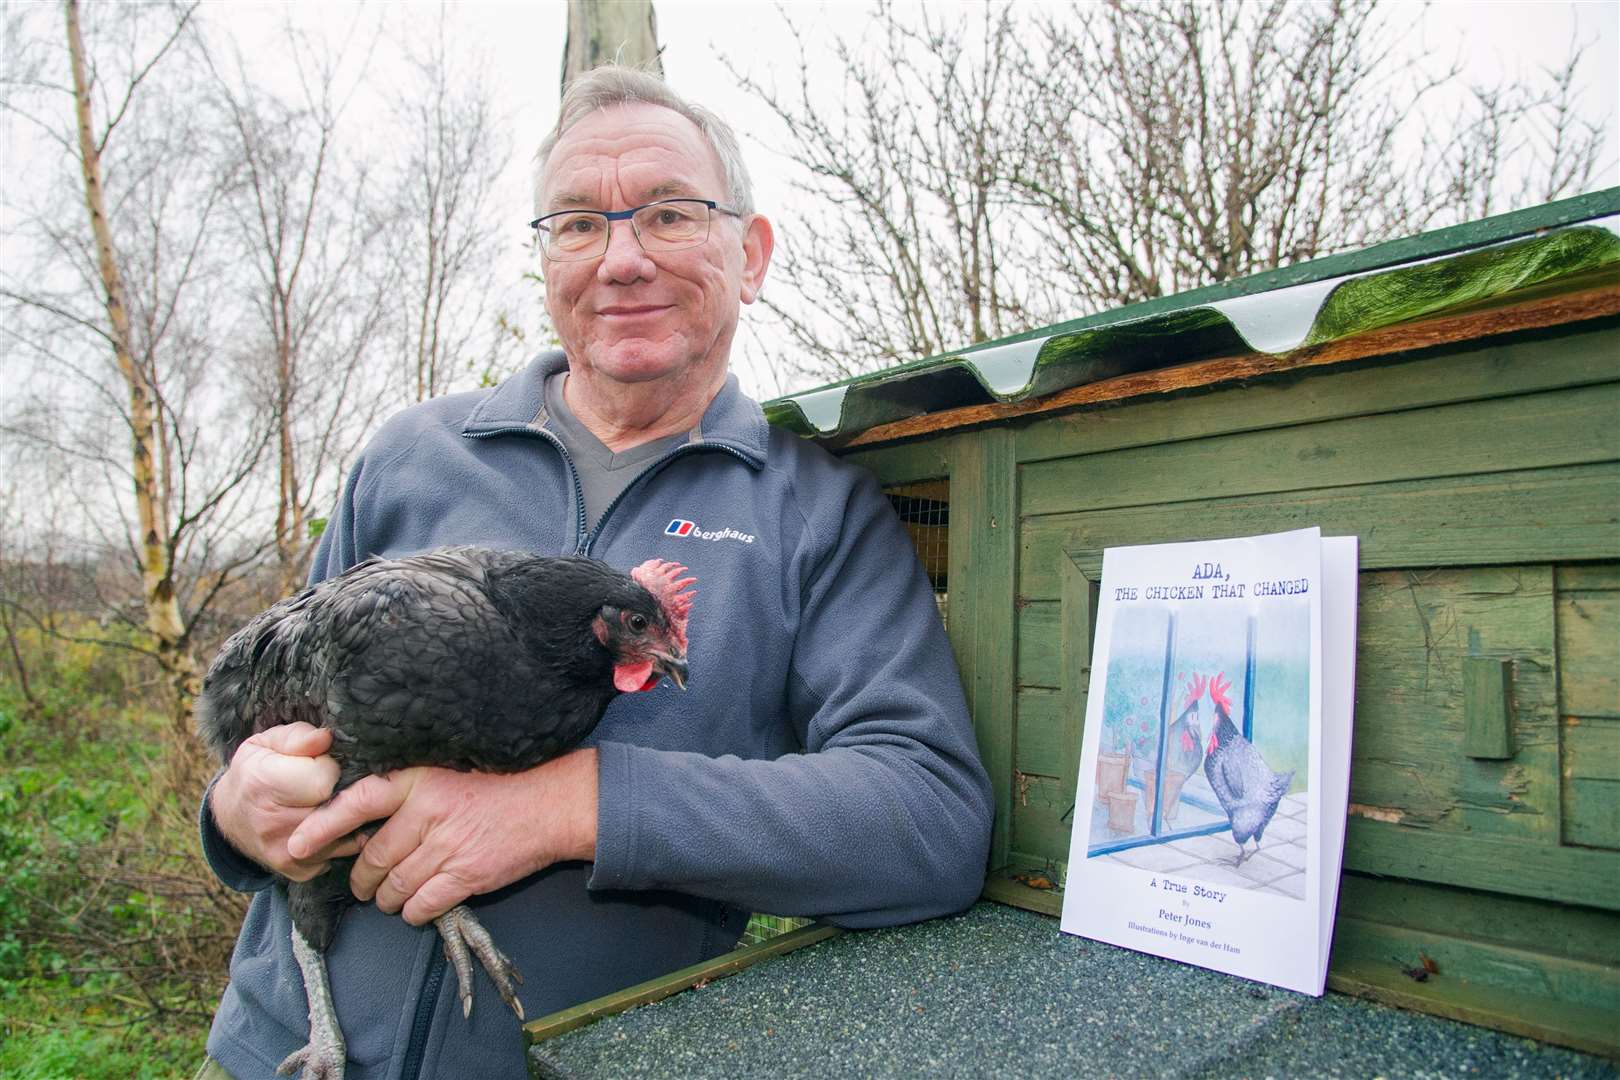 Peter Jones, from Kinloss, has written a book for older primary-aged children, 'Ada, The Chicken That Changed', based on real-life events in his chicken coop. Picture: Daniel Forsyth.